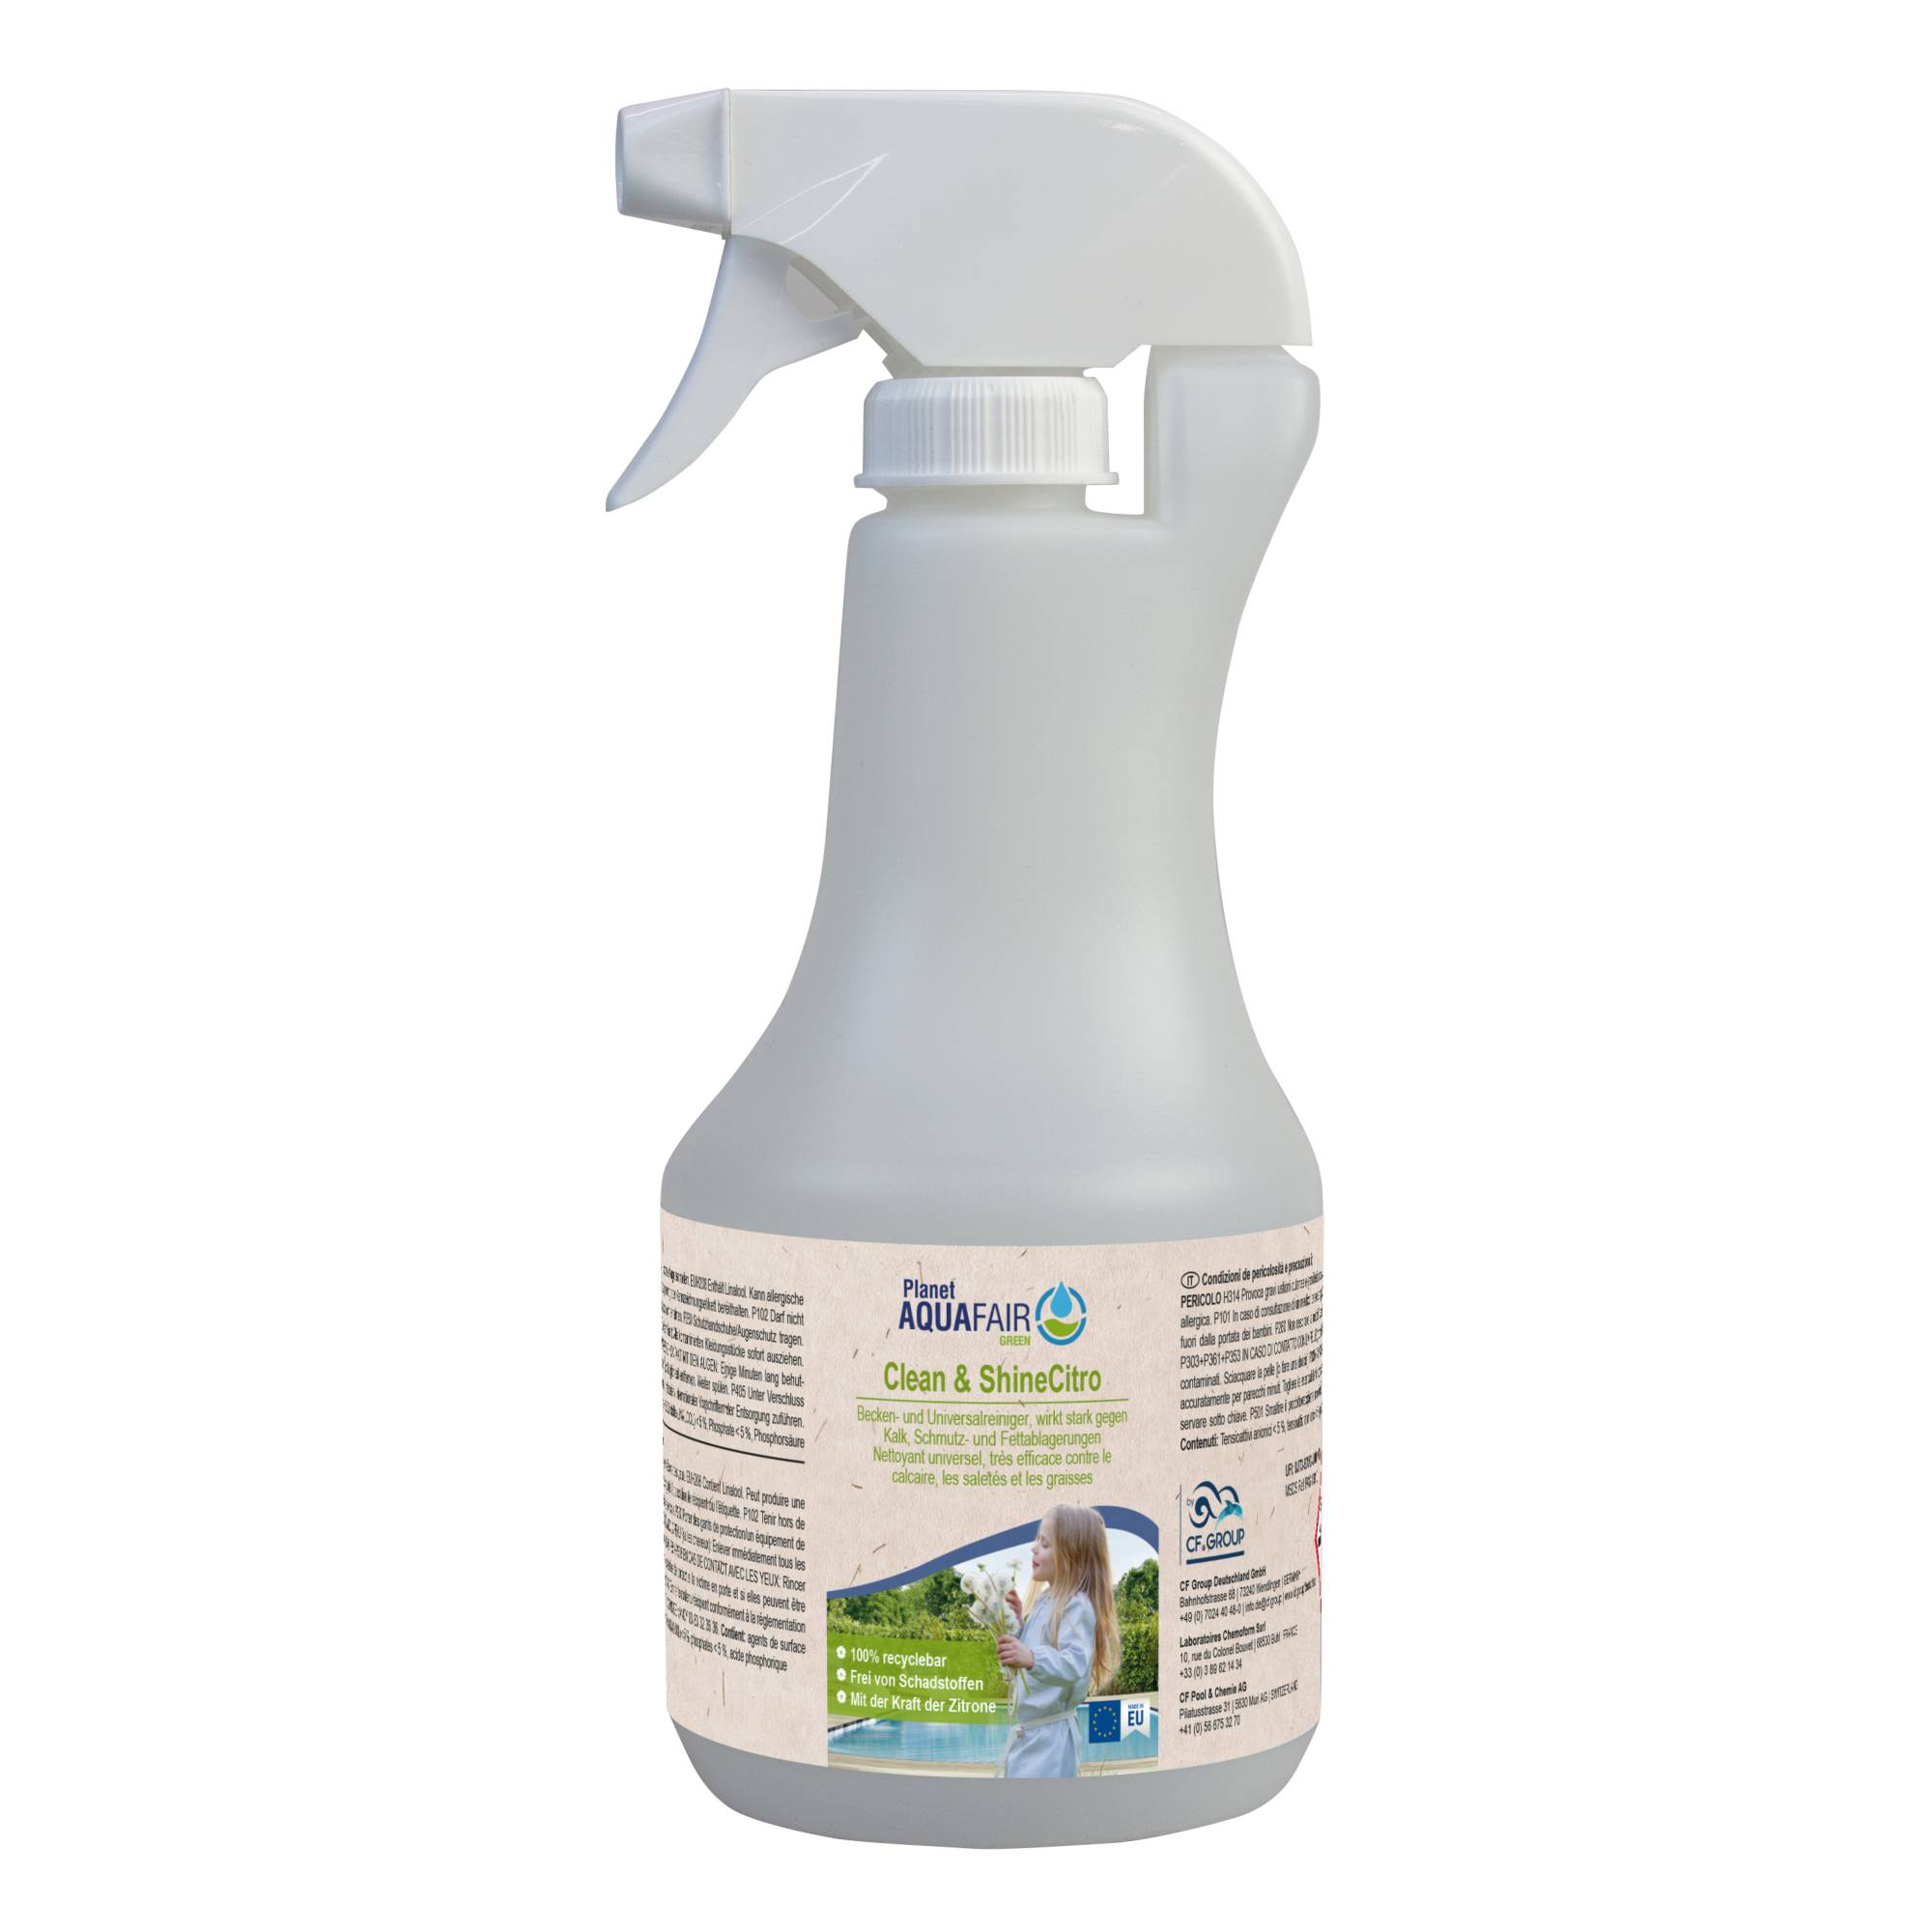 Poolpflege 'Clean & Shine' Citro 500 ml + product picture